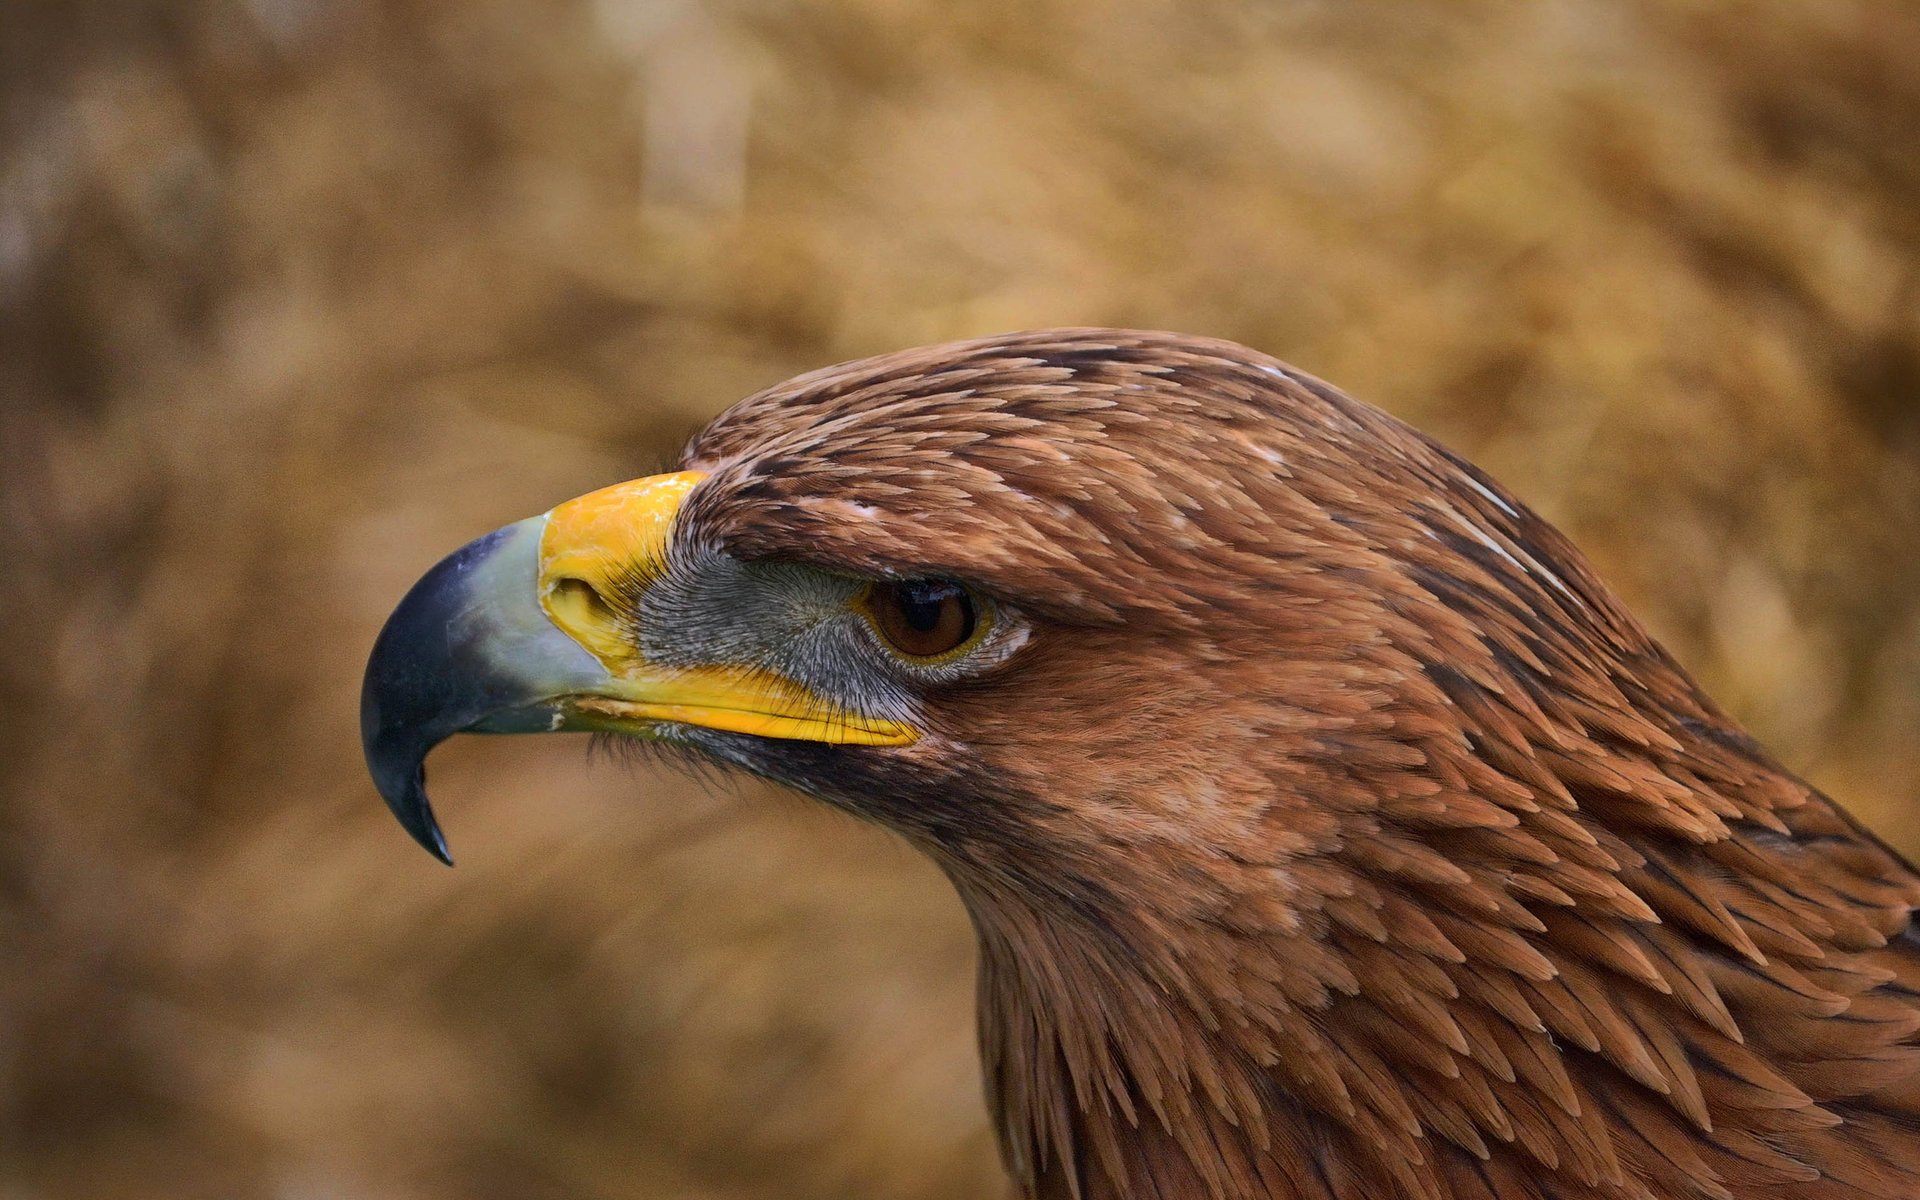 An eagle with a yellow beak looks to the left